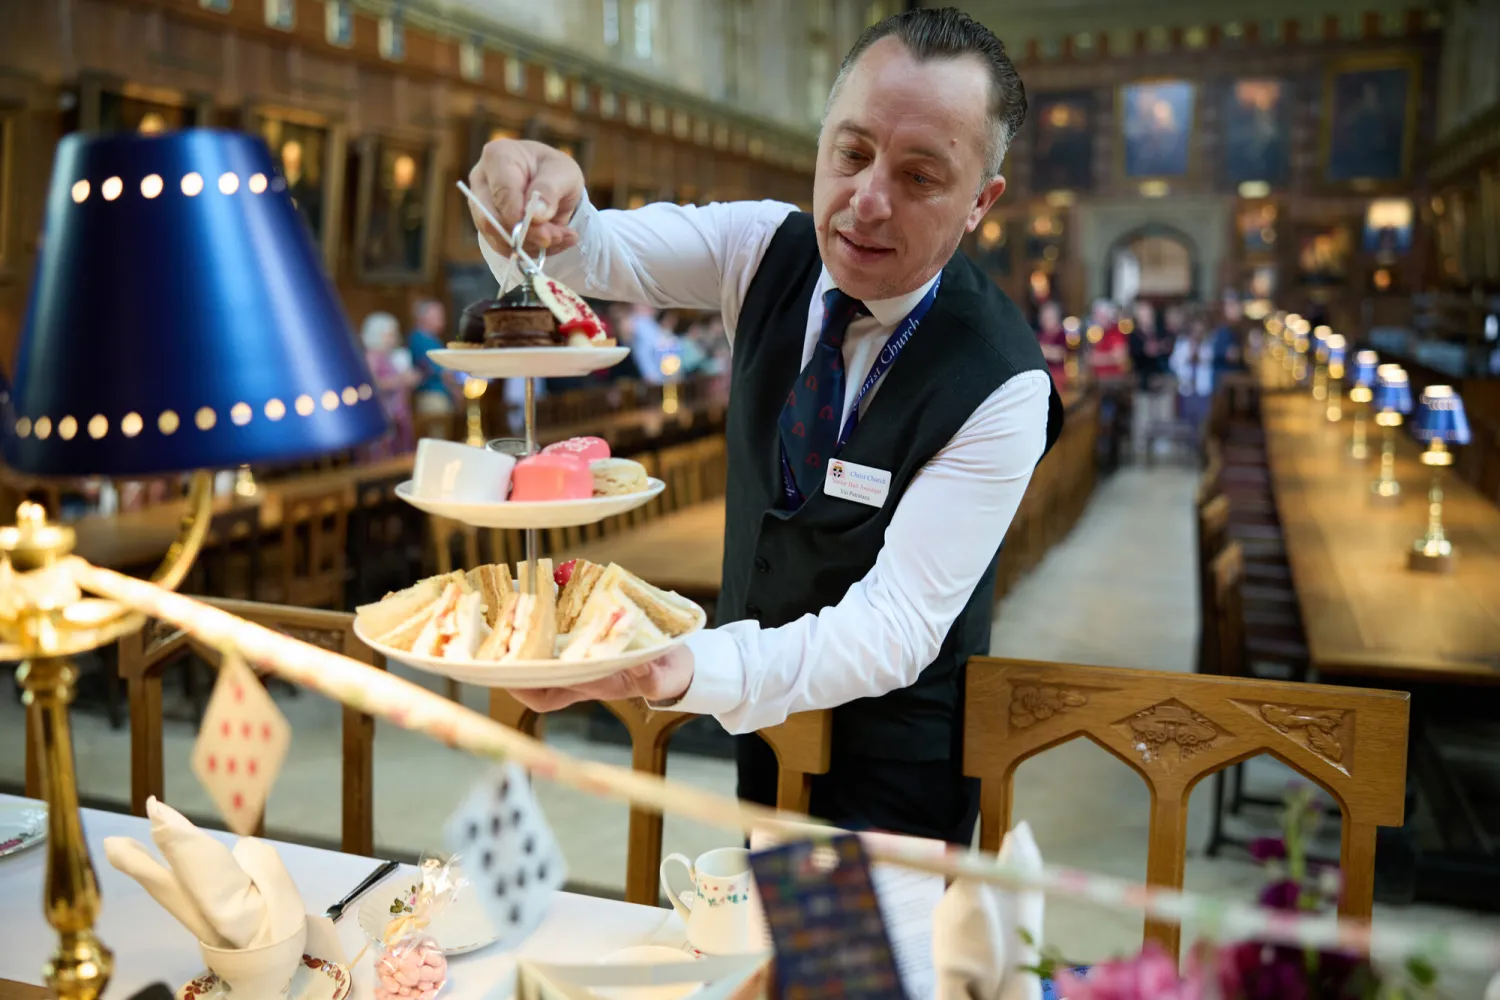 A photo showing a member of staff setting down an afternoon tea stand on high table 